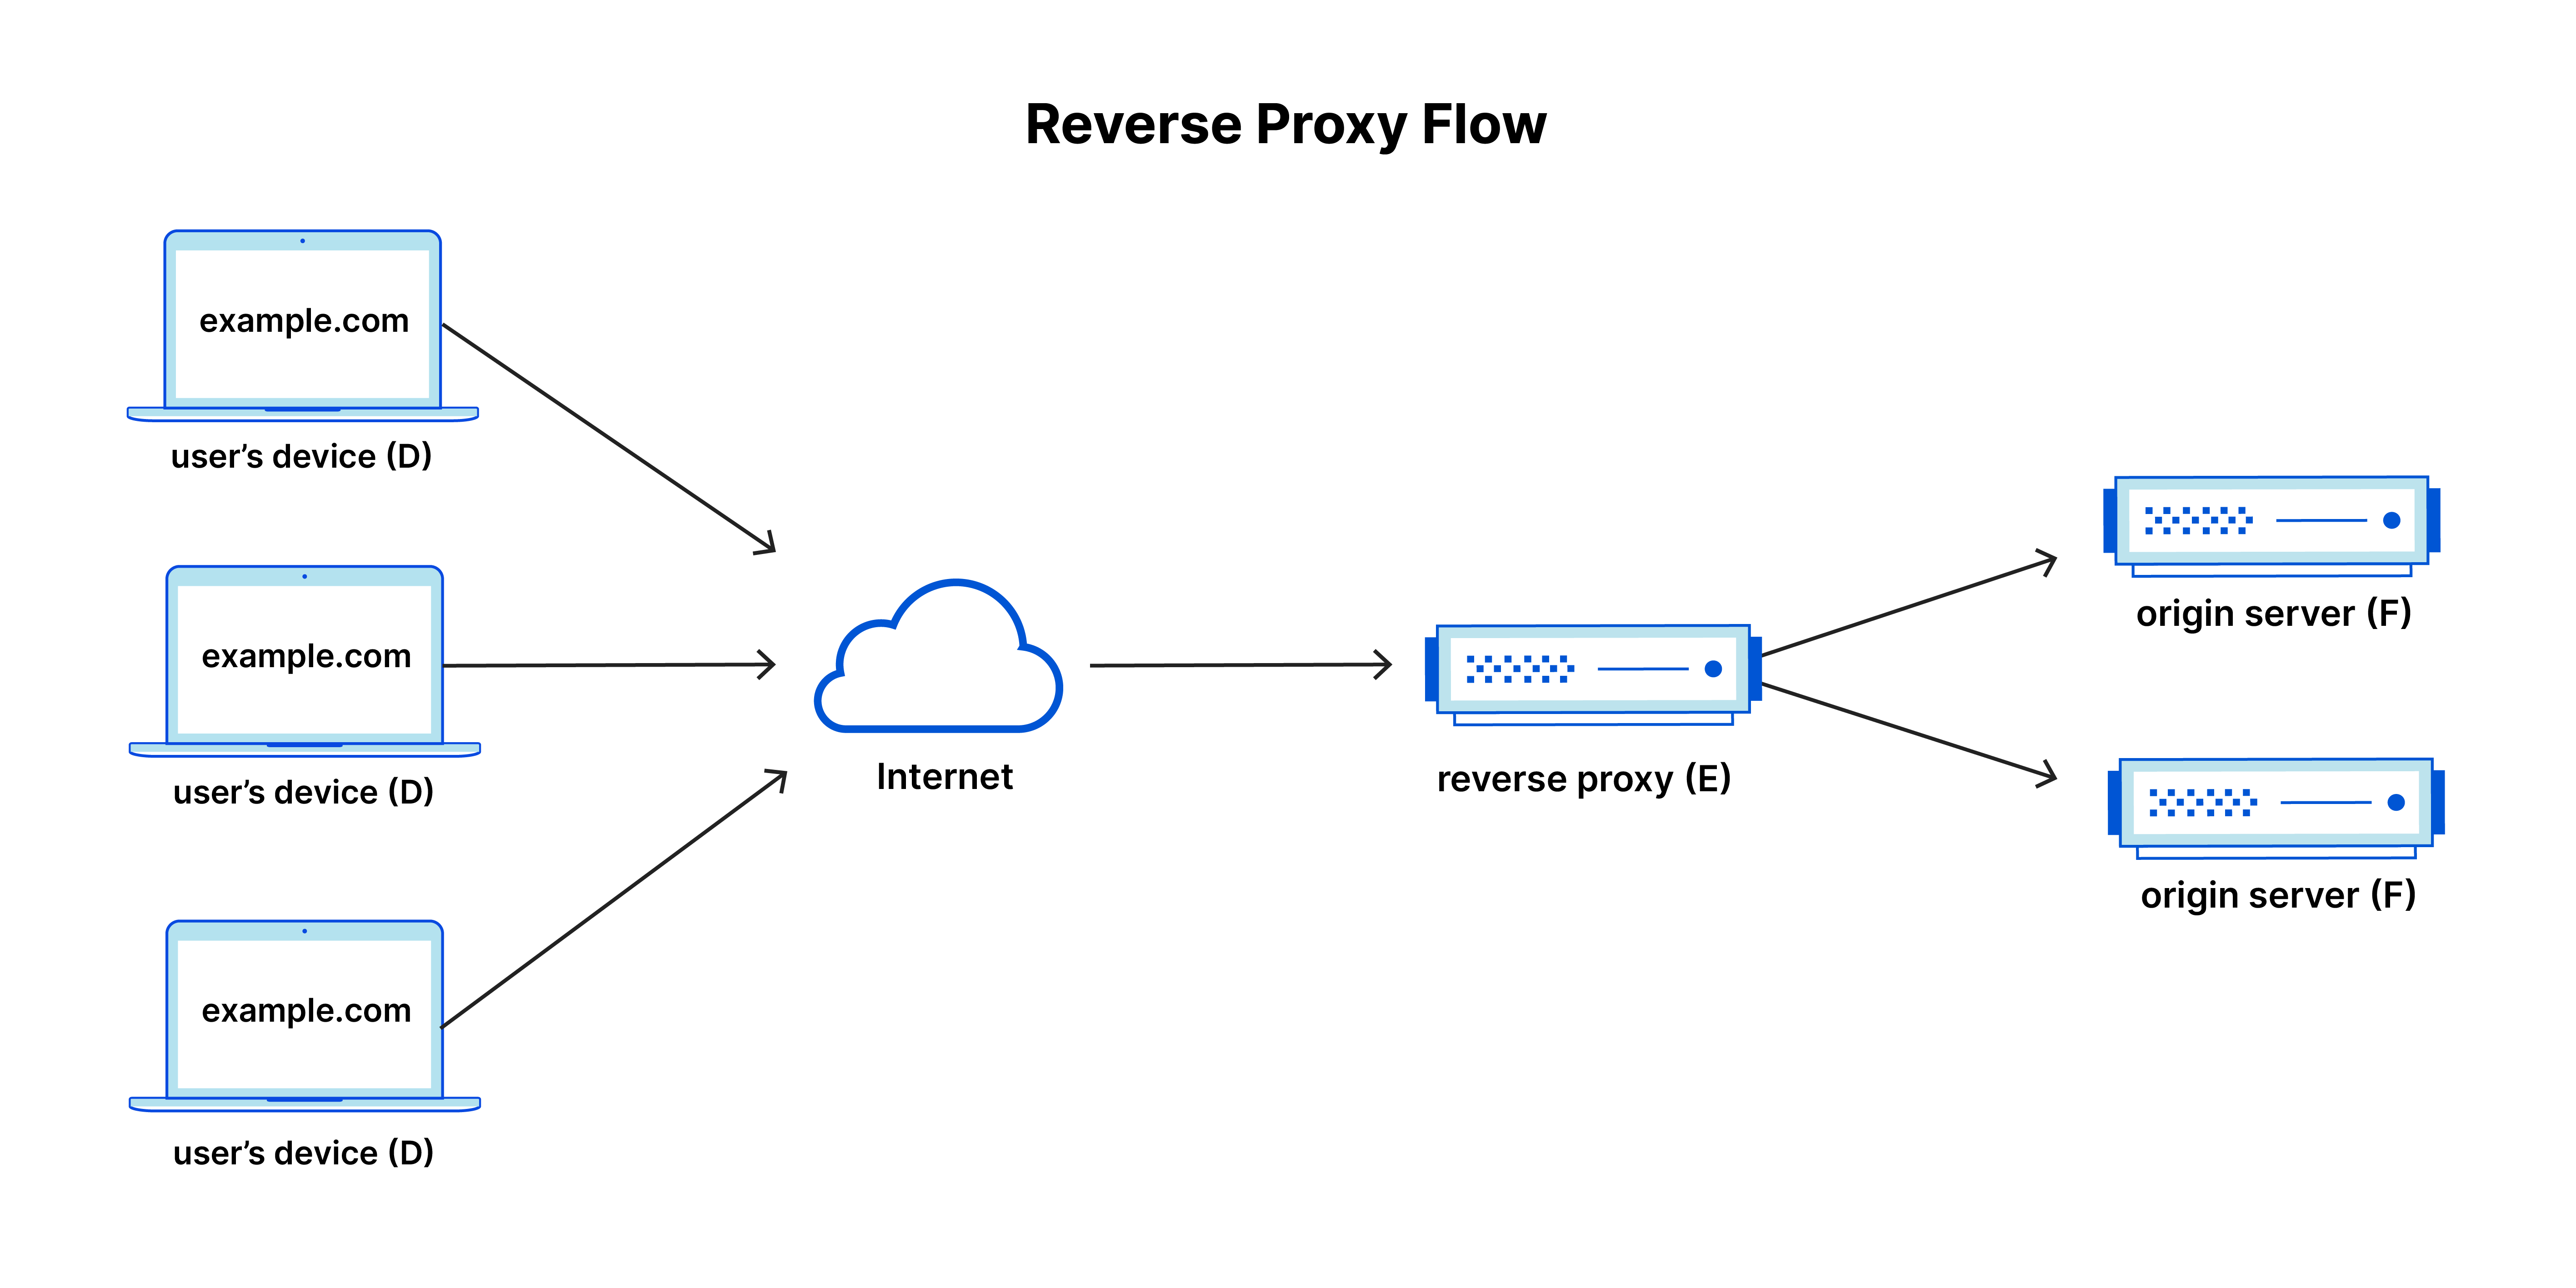 Reverse proxy flow: traffic flows from user's device (D) to Internet to reverse proxy (E) to origin server (F)